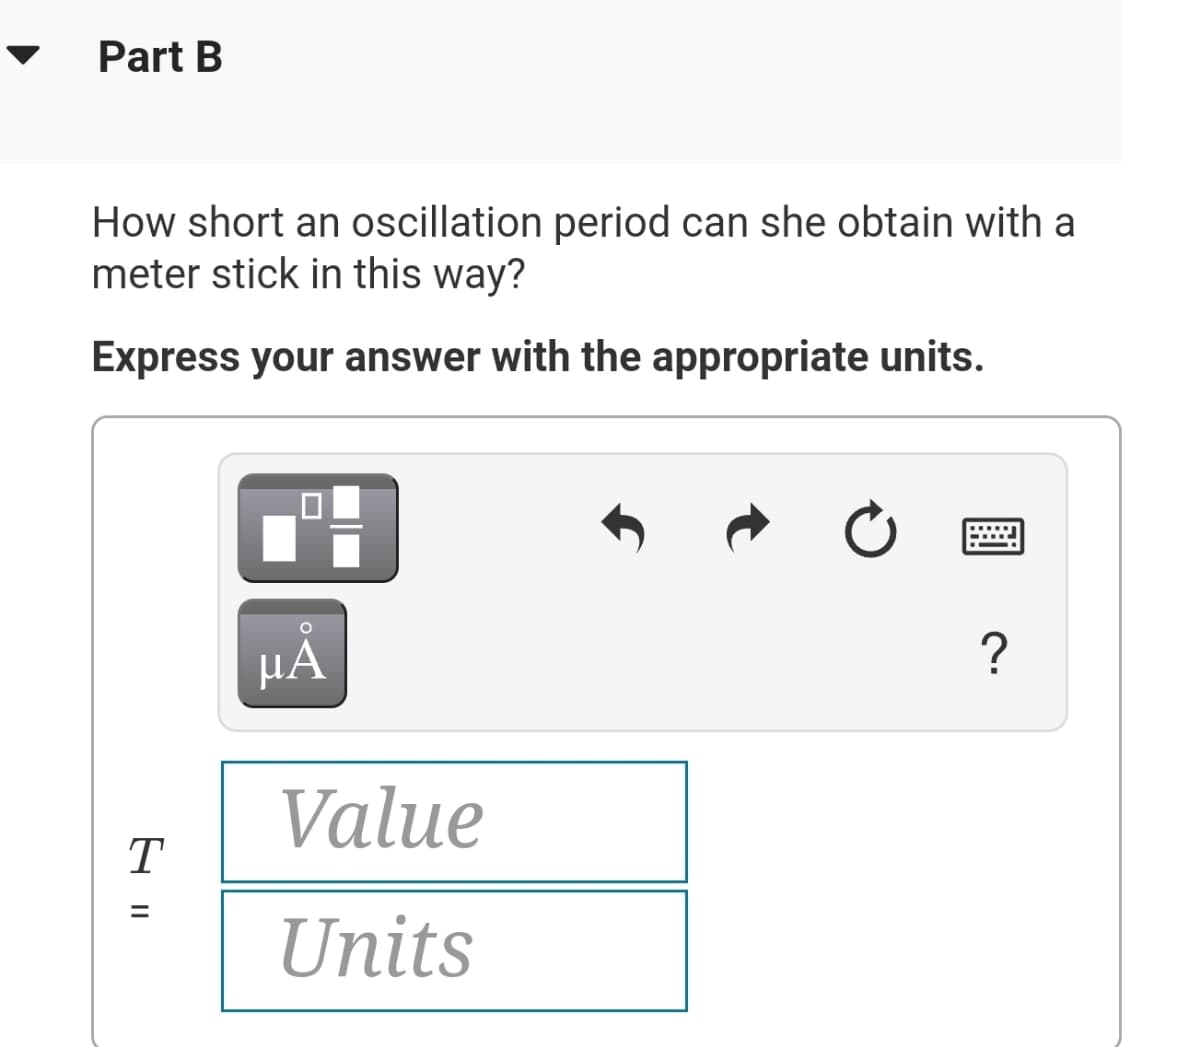 Part B
How short an oscillation period can she obtain with a
meter stick in this way?
Express your answer with the appropriate units.
HẢ
?
Value
T
Units
